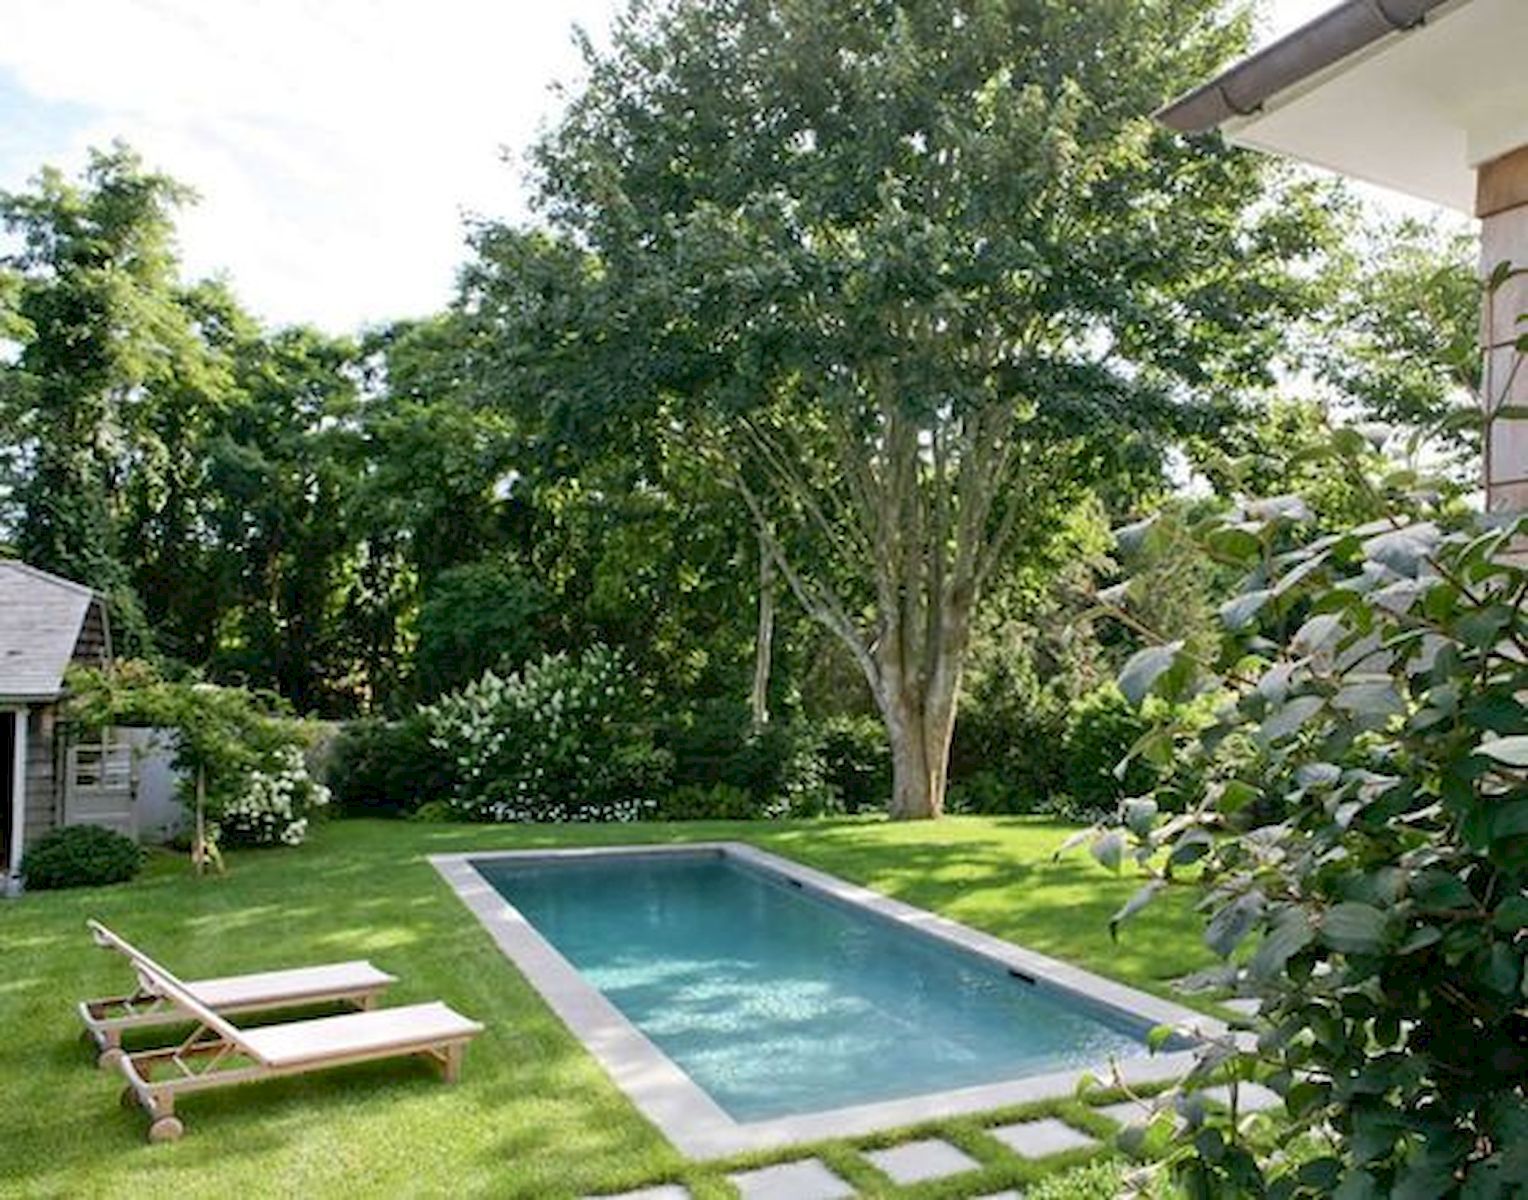 50 Gorgeous Small Swimming Pool Ideas for Small Backyard (23)